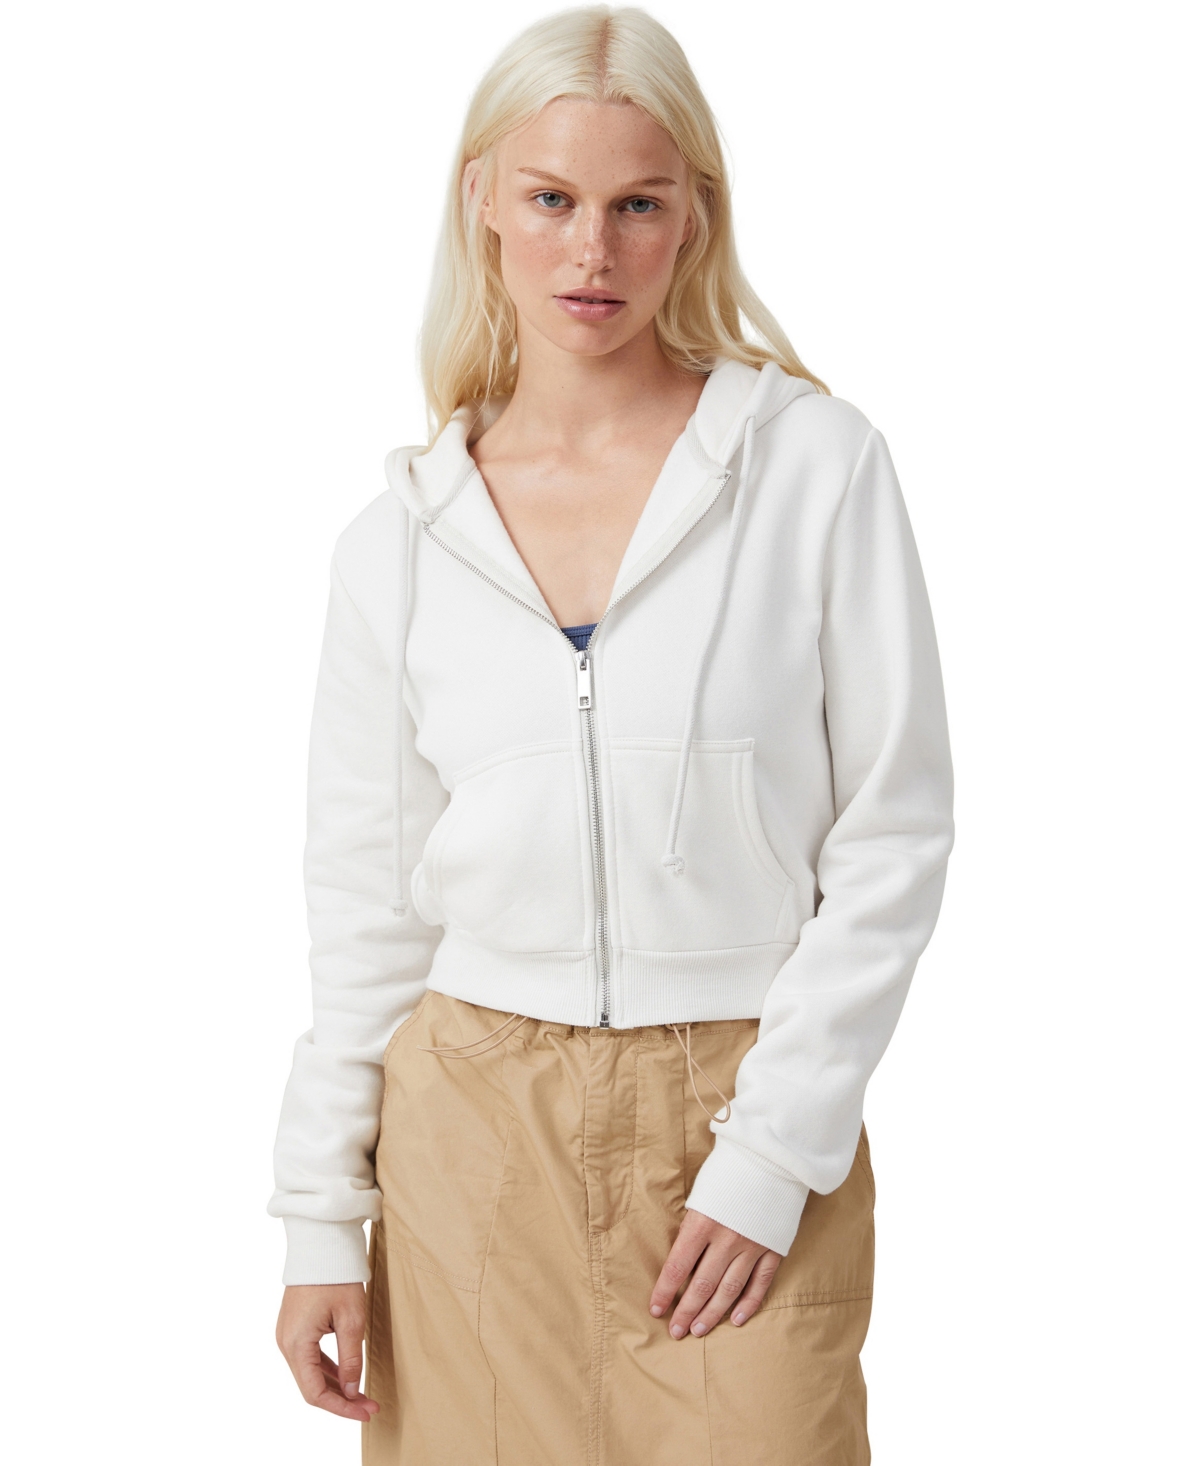 COTTON ON WOMEN'S CLASSIC CROPPED FITTED ZIP THROUGH TOP